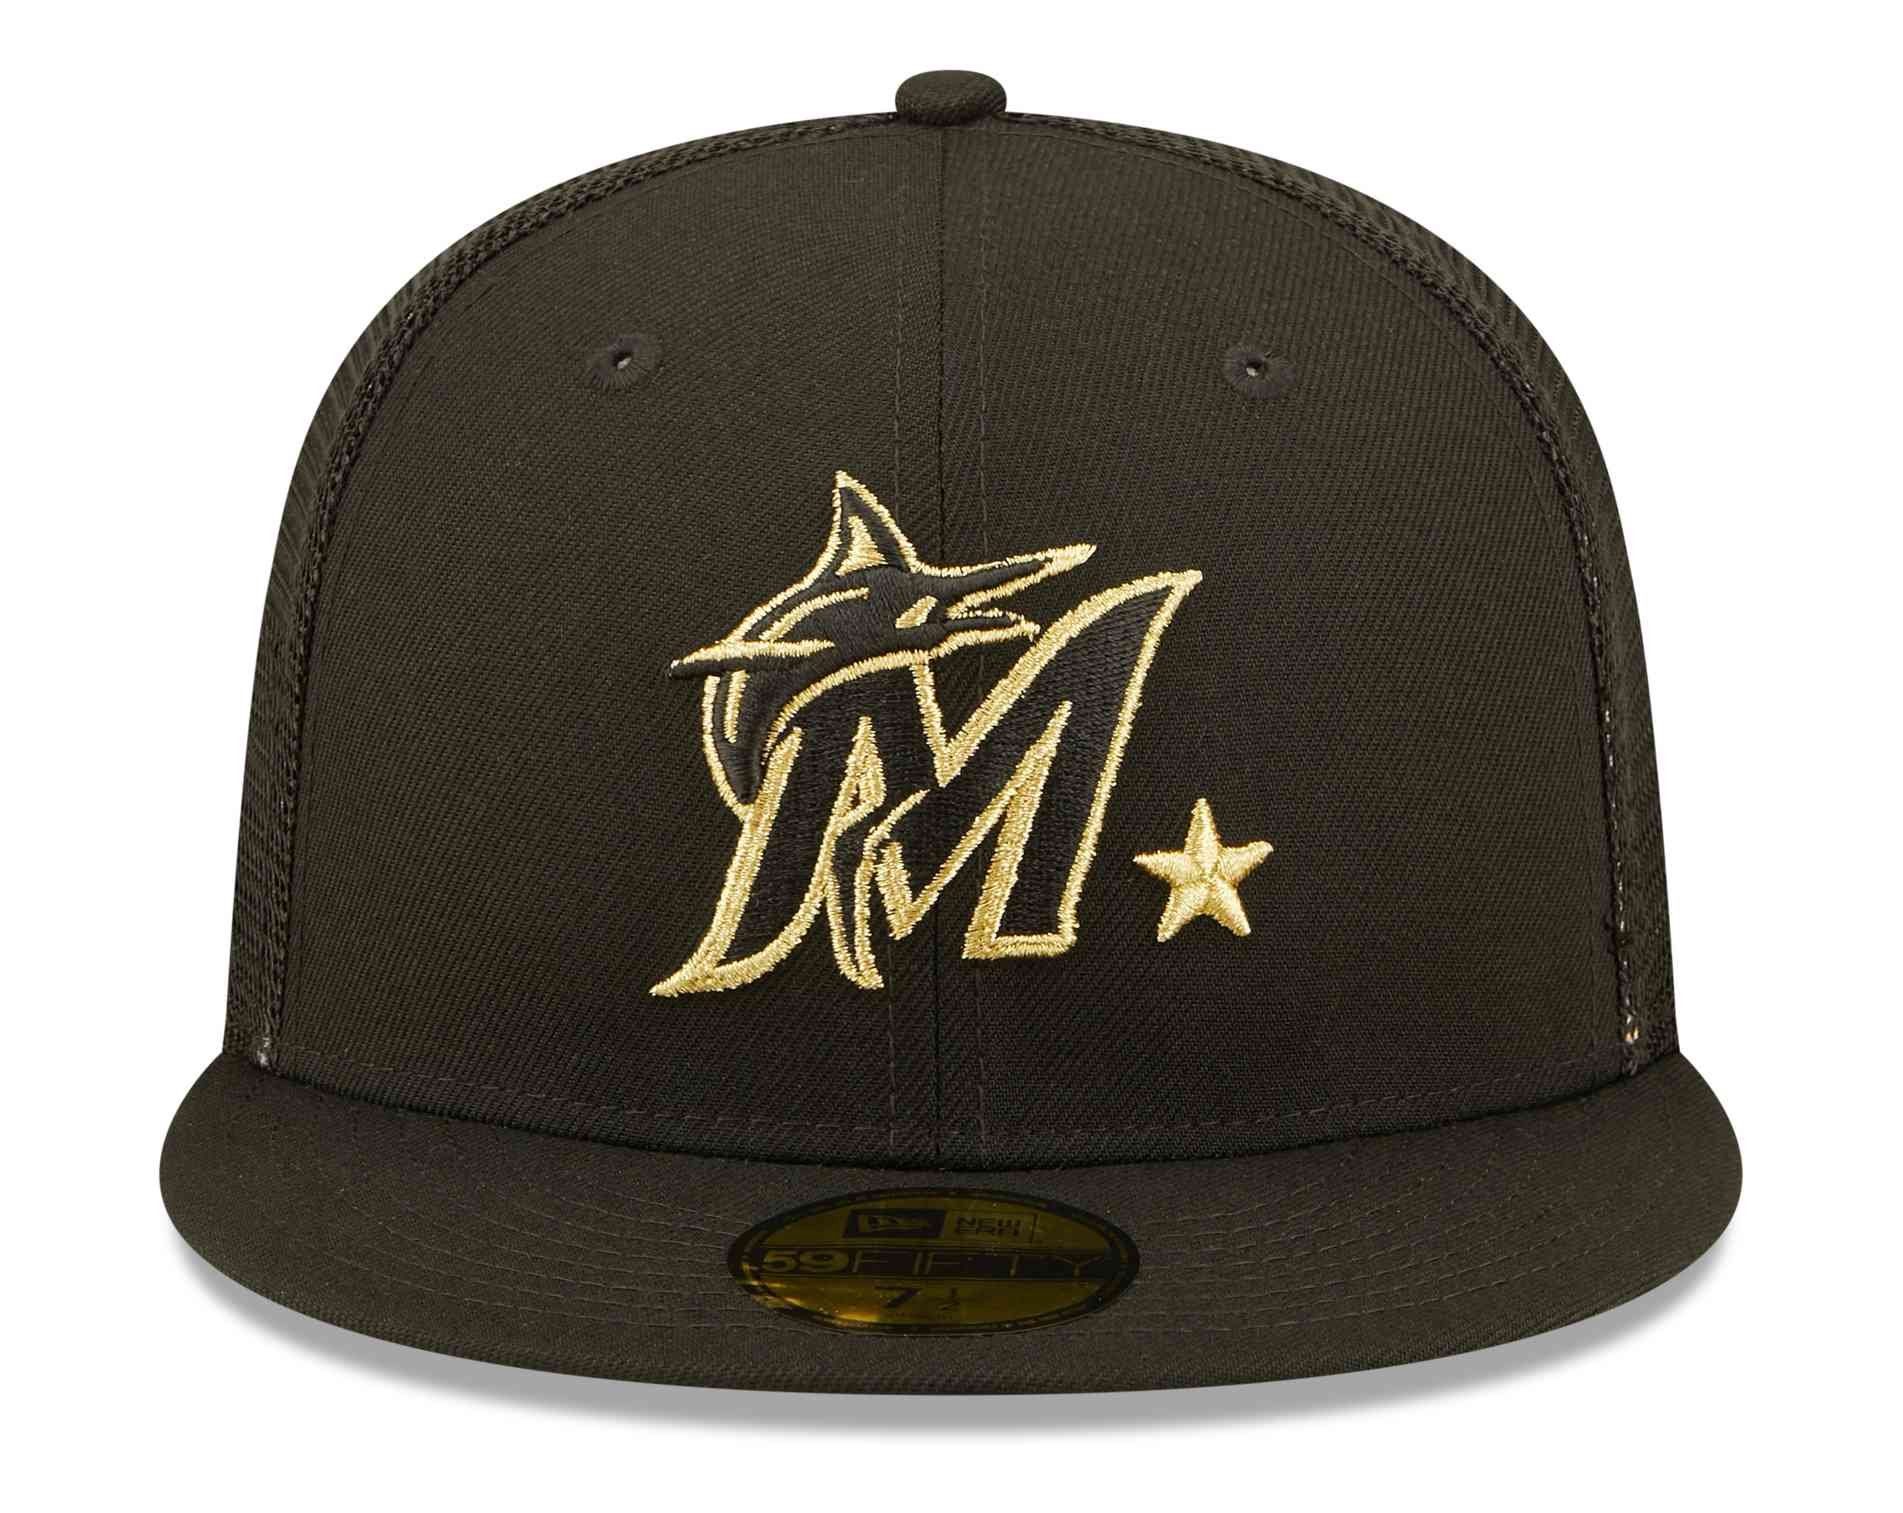 New All Fitted Game Patch Star 59Fifty Miami Cap MLB Marlins Era